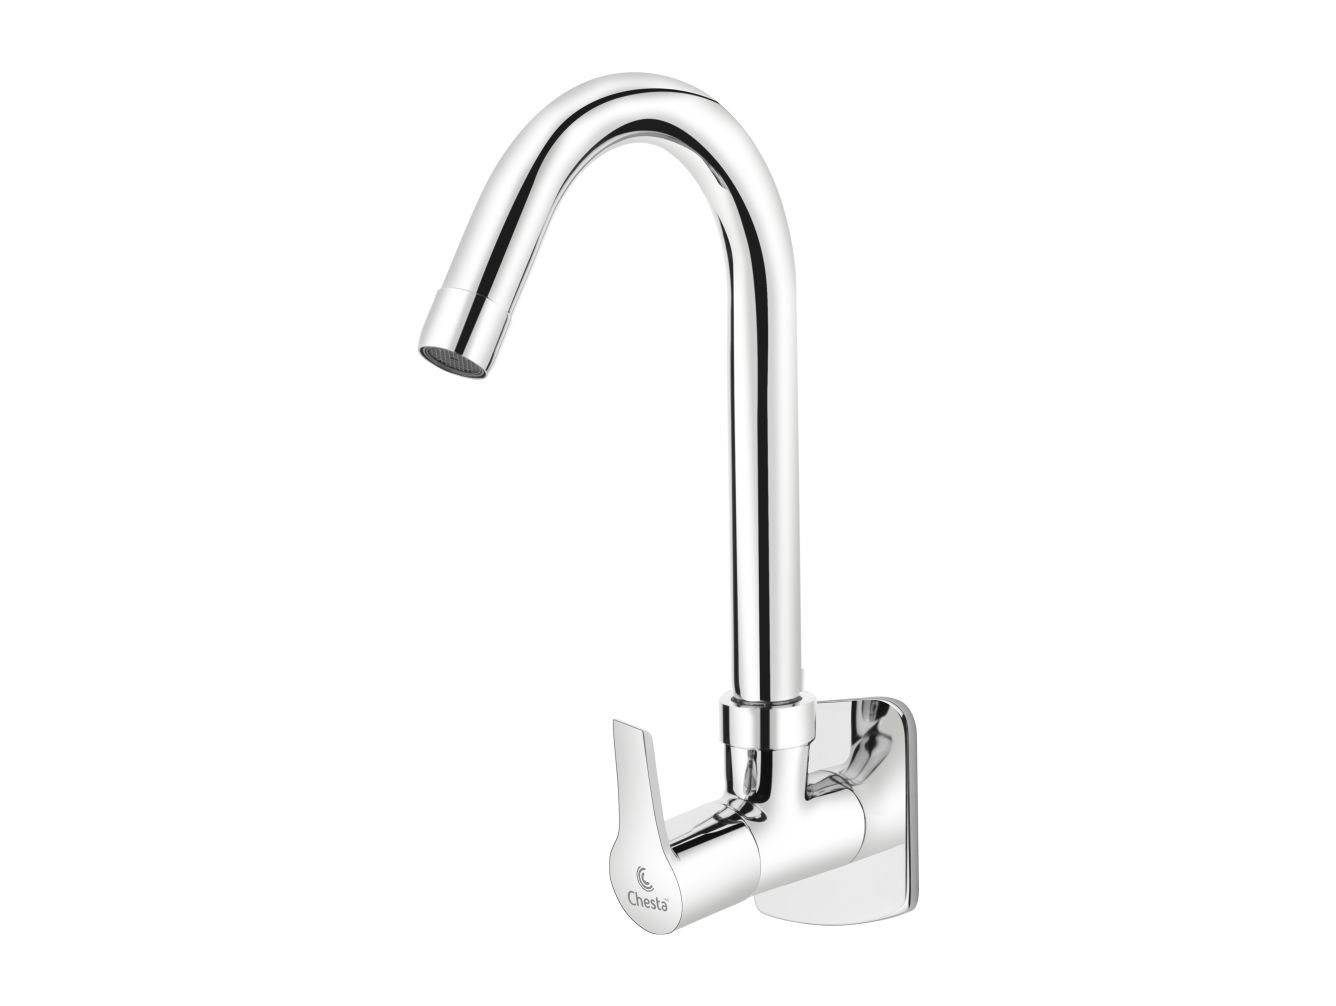 DY - 1007 - Sink Cock with Wall Flange by Chesta Bath